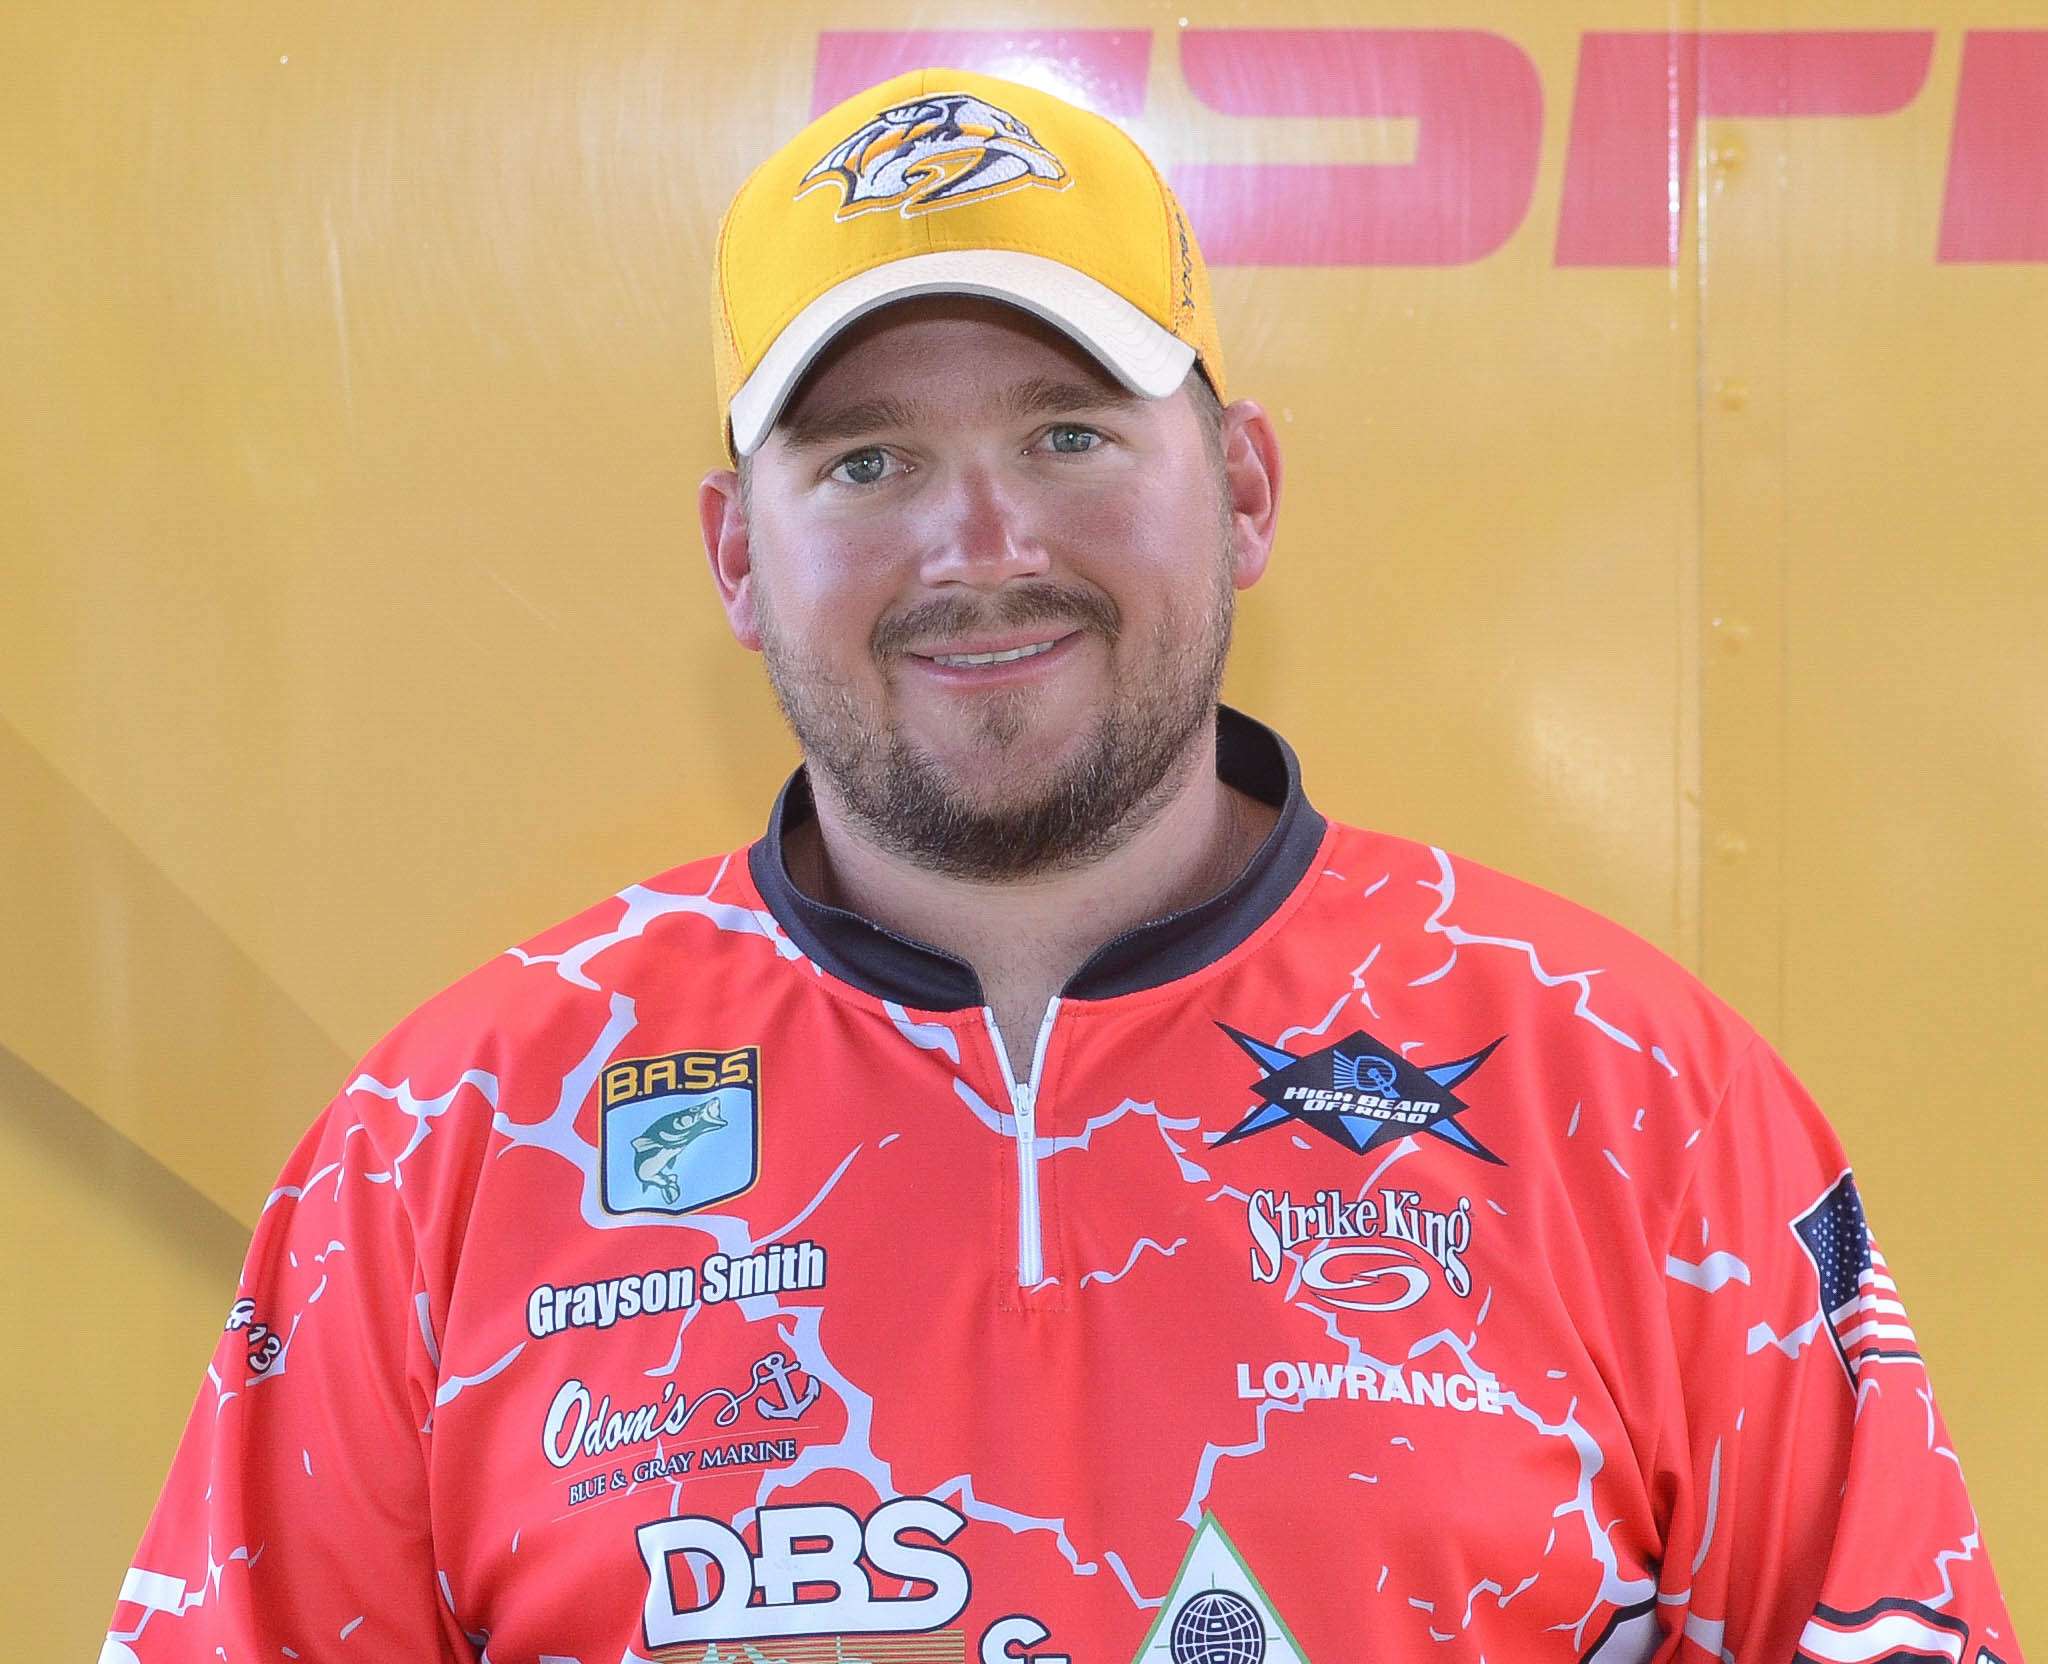 Grayson Smith <br>
Tennessee Boater <br>
Grayson Smith is a land surveyor in Tennessee, where heâs a member of the Montgomery County Bass Club. His favorite things to do besides go fishing including paddleboarding, kayaking and duck hunting. This championship will be his first. He is sponsored by DBS & Associates Engineering, Cumberland Bank and Trust, Triton Boats, Mercury Marine, Lowrance, Vicious, Strike King Lure Co., Maloneâs Blue and Gray Marine. 